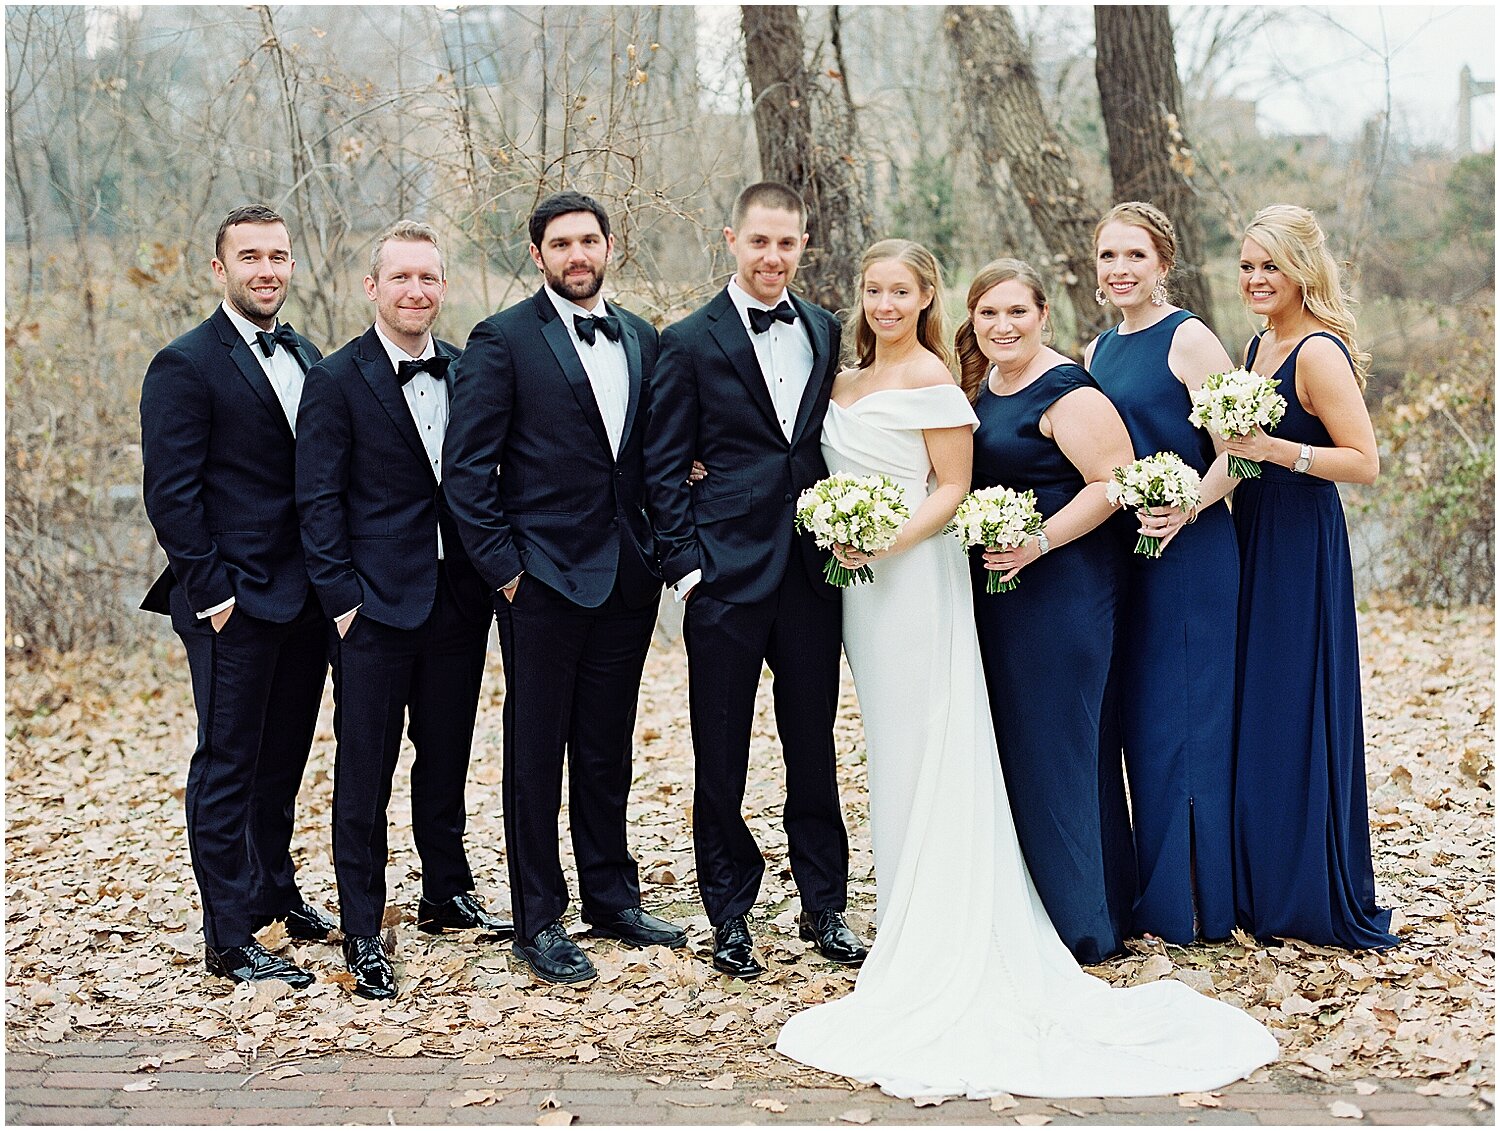  bridal party in MPLS wedding 